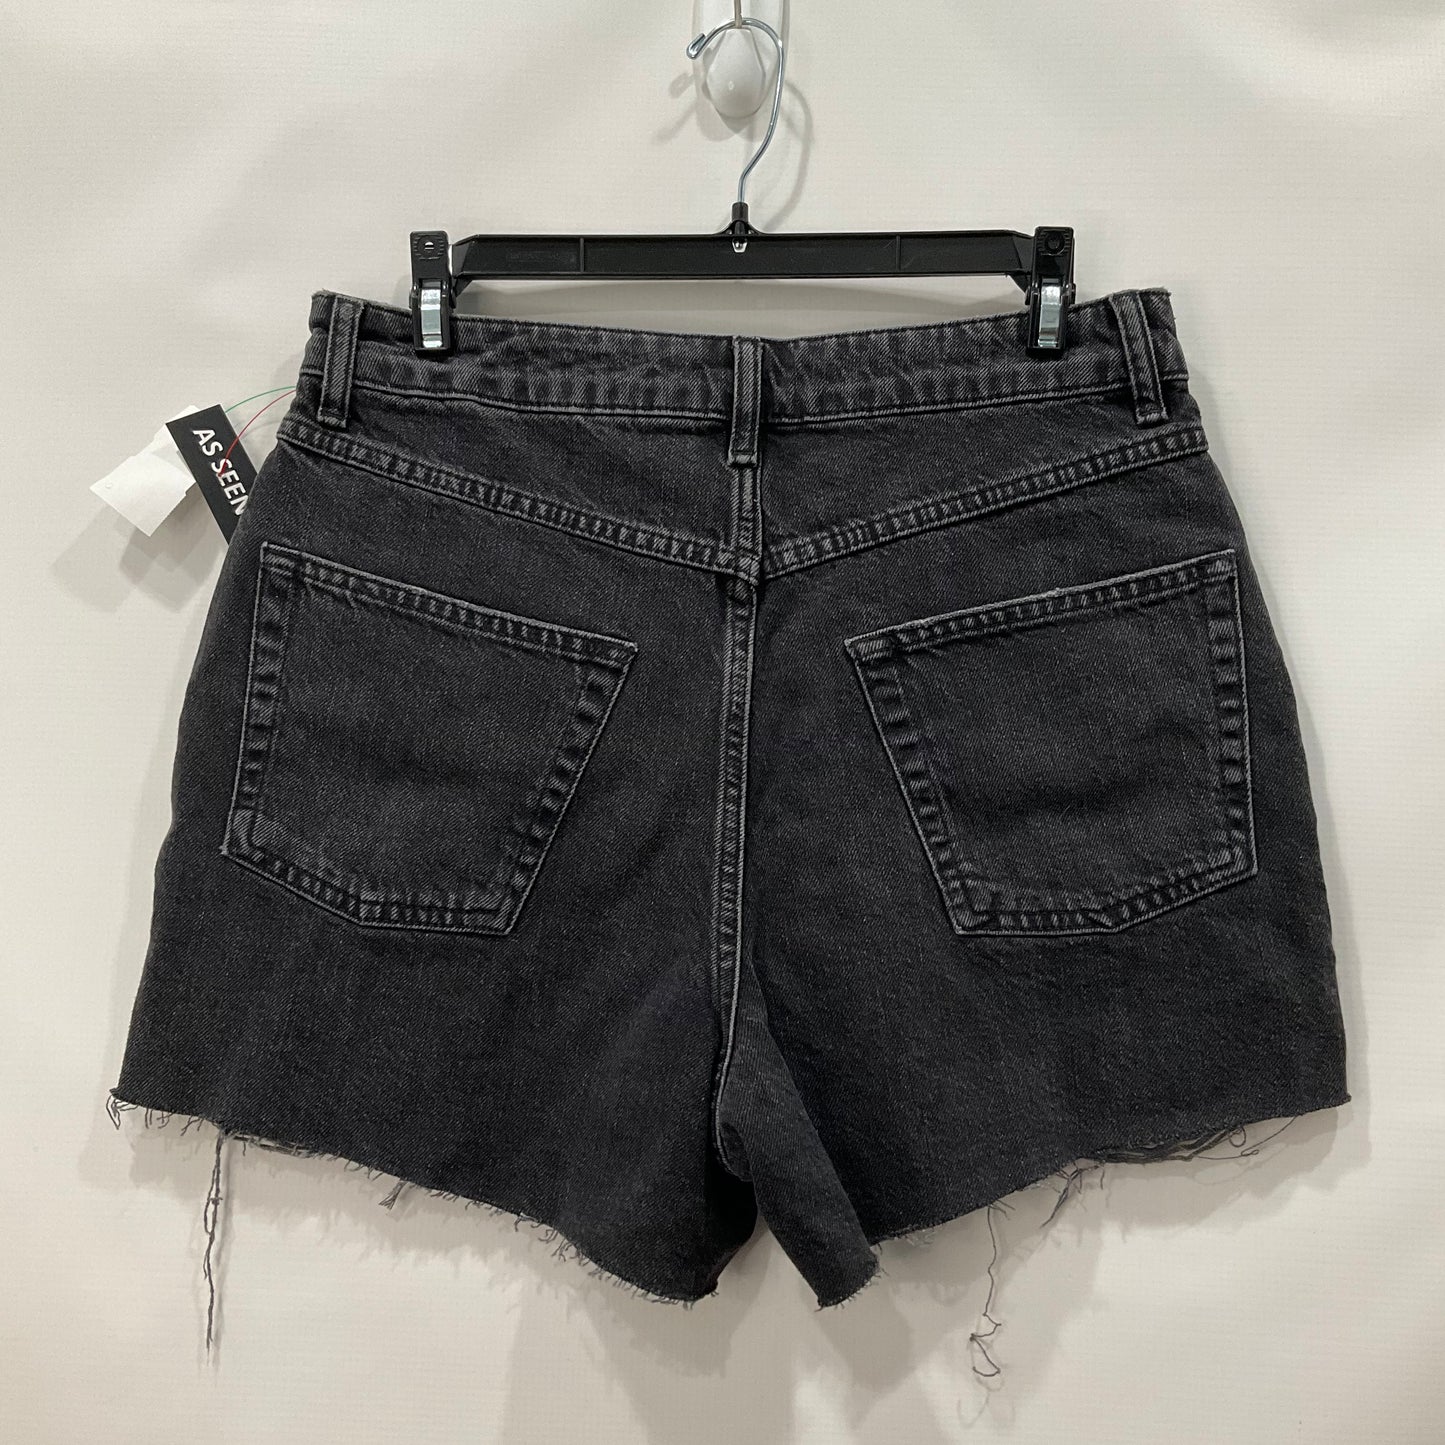 Shorts By Top Shop  Size: 6